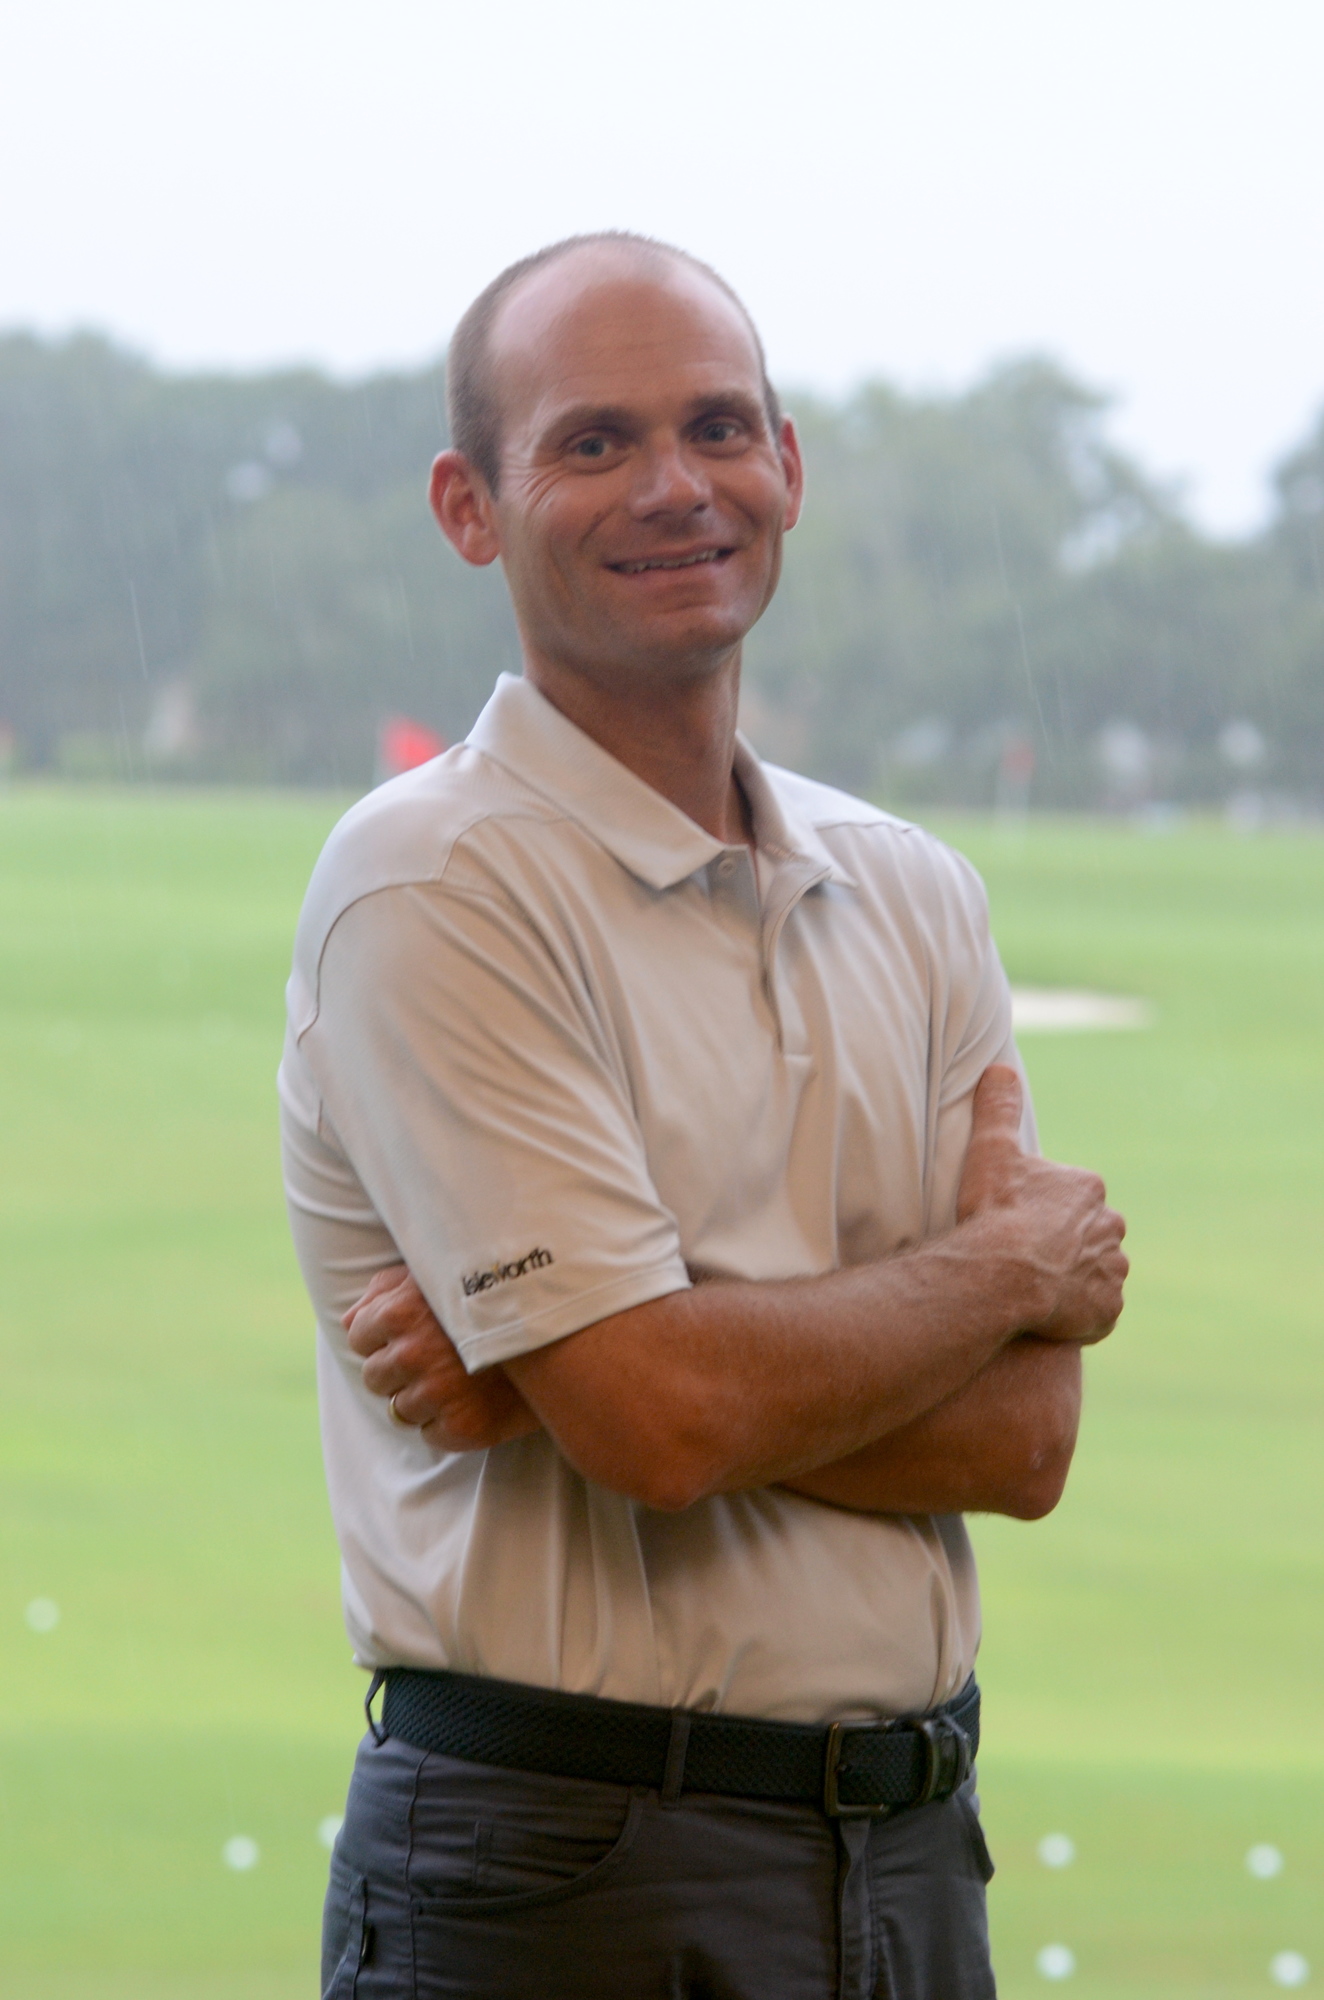 Matthew Borchert graduated from Dr. Phillips High and played his college golf at the University of North Florida.